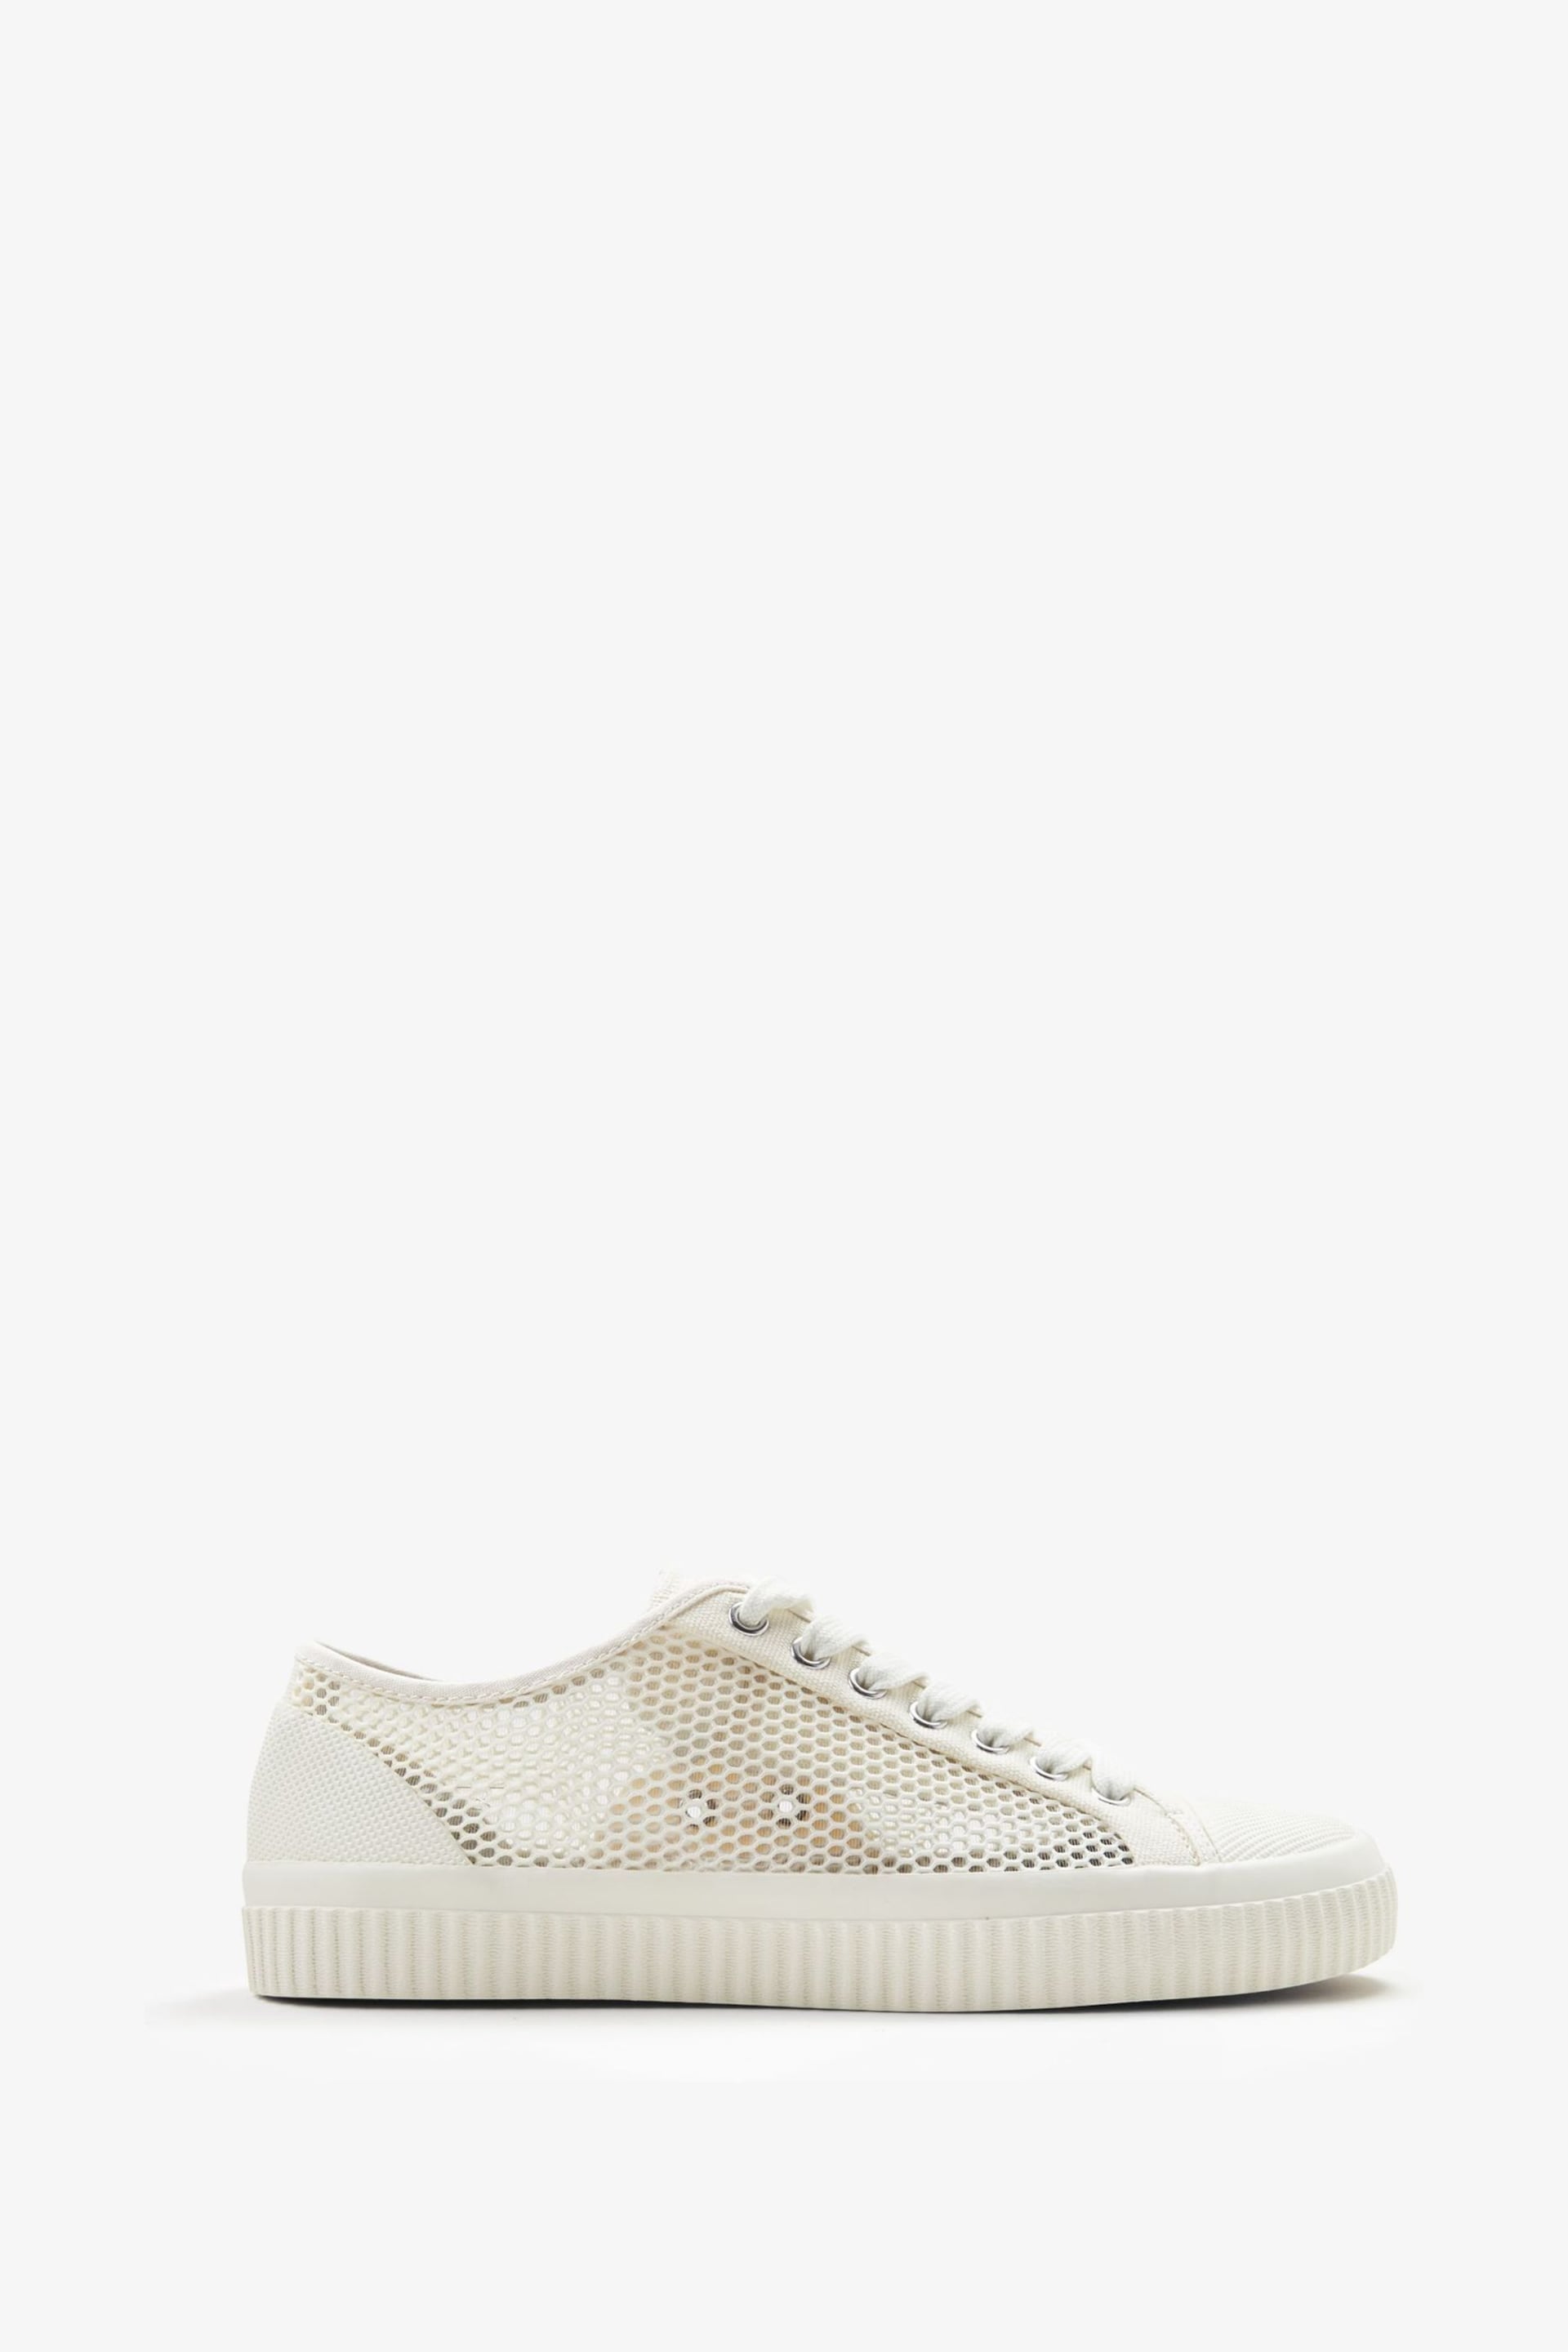 Fred Perry Womens Ecru White Hughes Mesh Trainers - Image 1 of 5